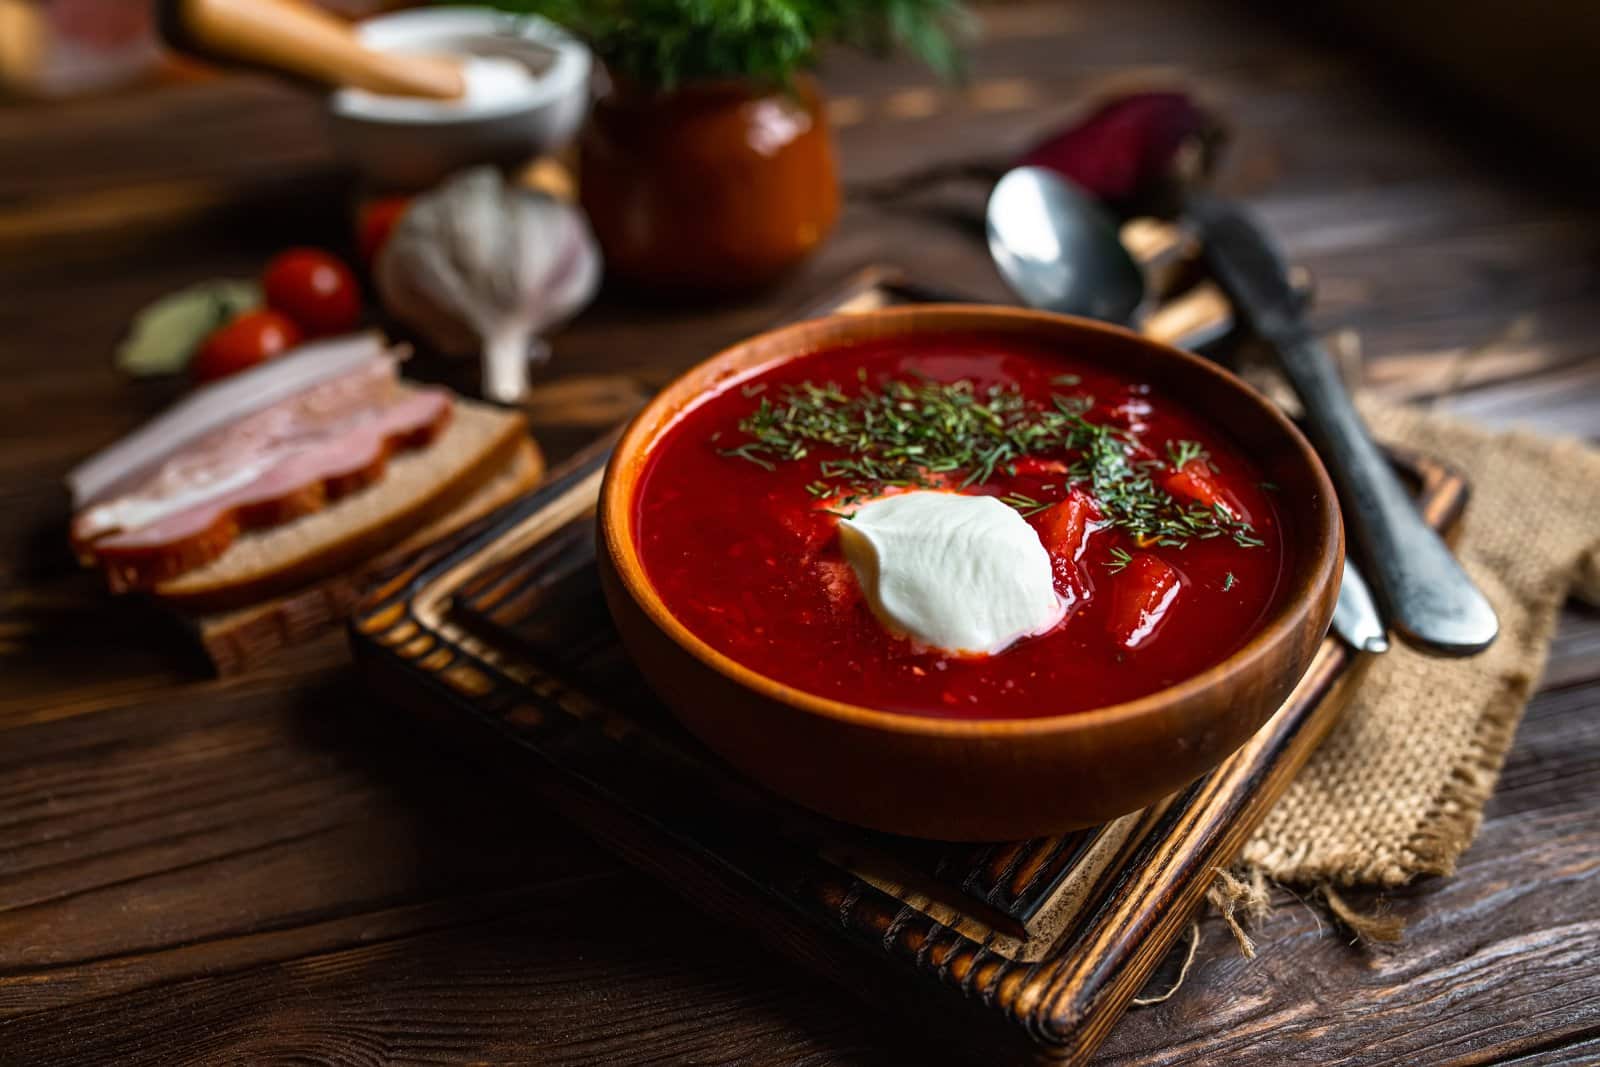 Image Credit: Shutterstock / Lipatova Maryna <p><span>This beet soup, with its distinctive ruby color and sour-sweet taste, is a staple across Eastern Europe. Serve hot or cold with a dollop of sour cream.</span></p>